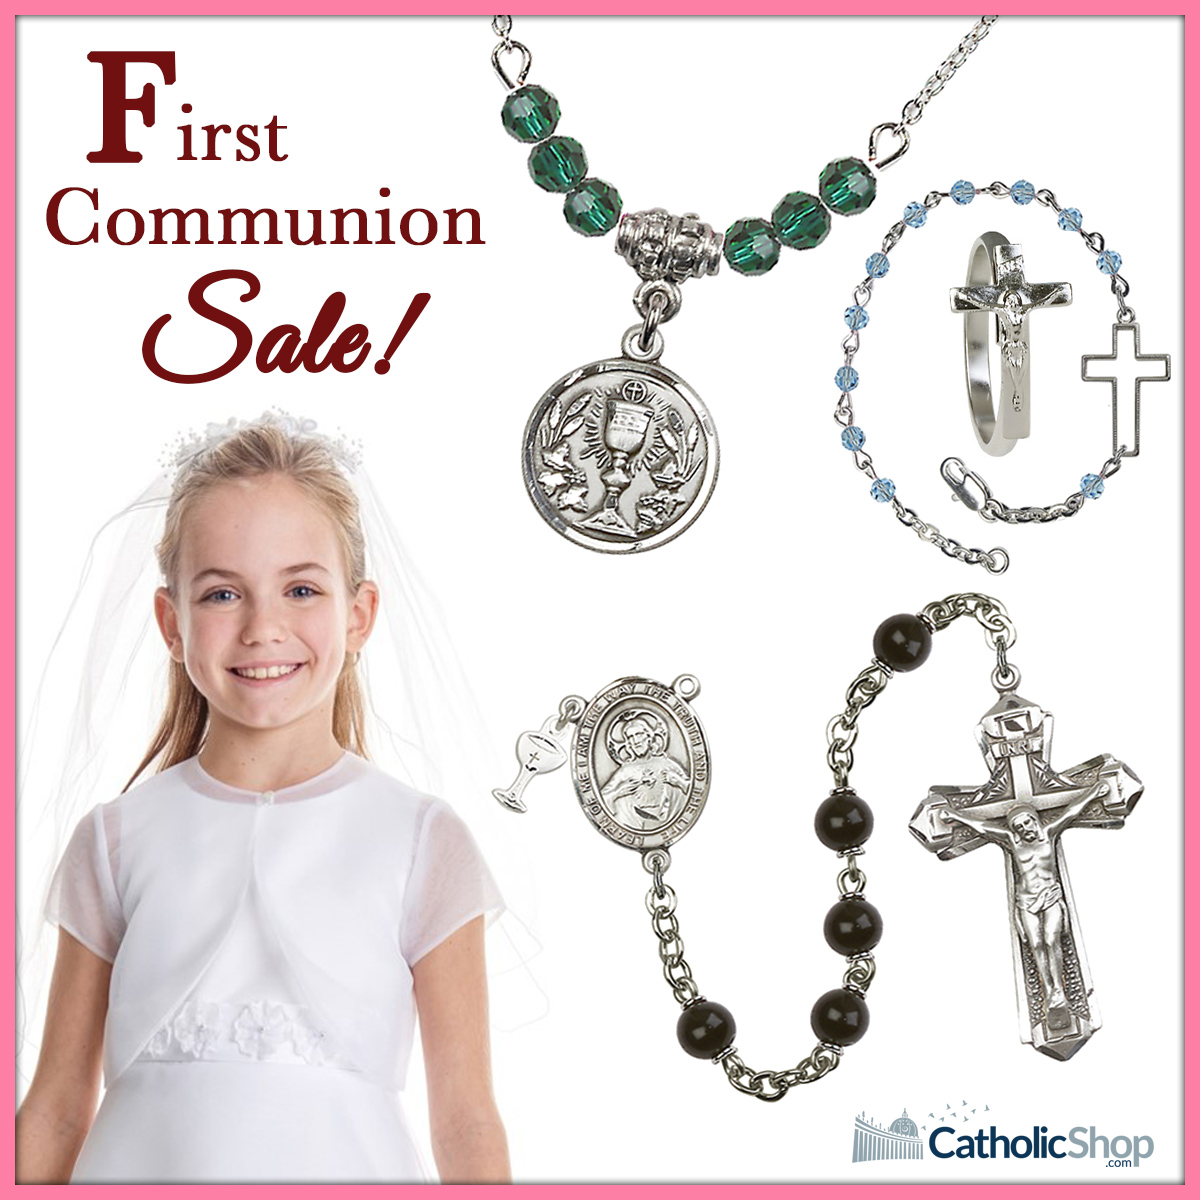 Gift ideas for First Communion